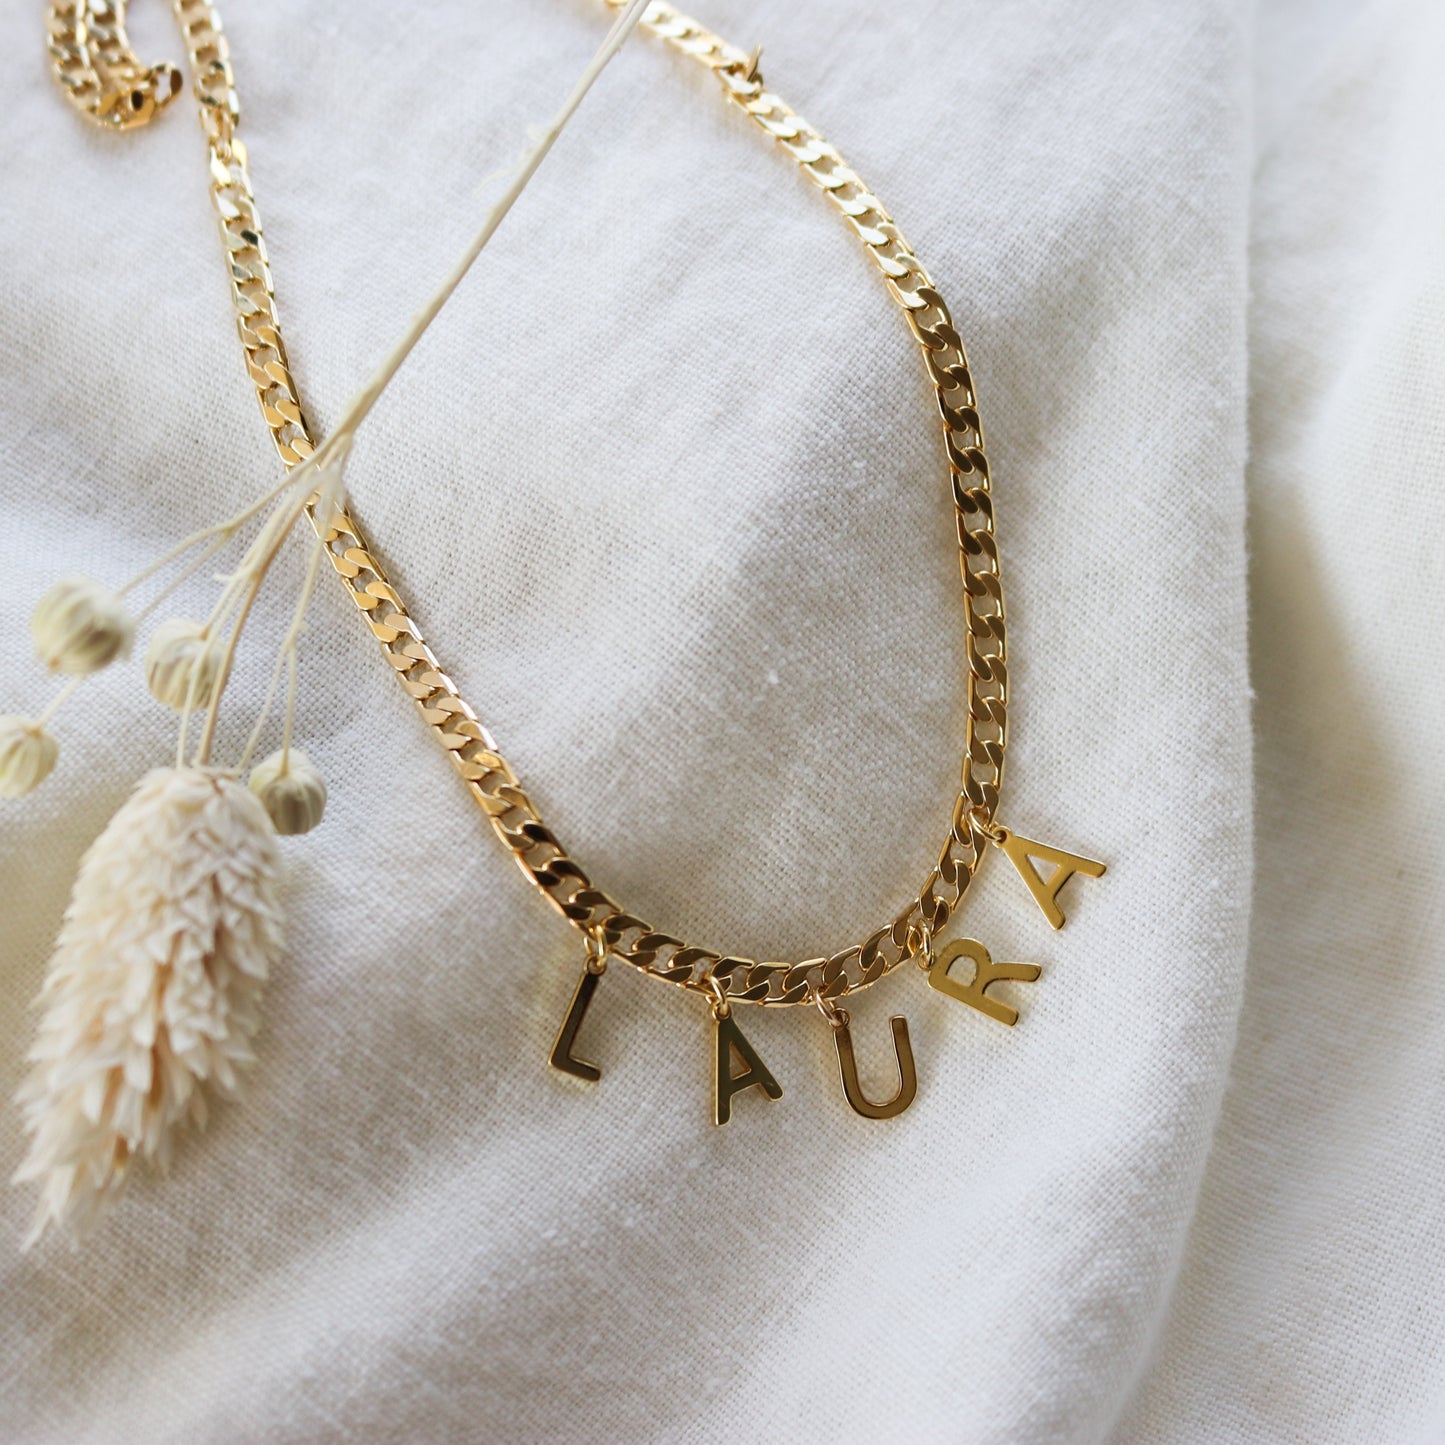 Personalized cuban chain Necklace